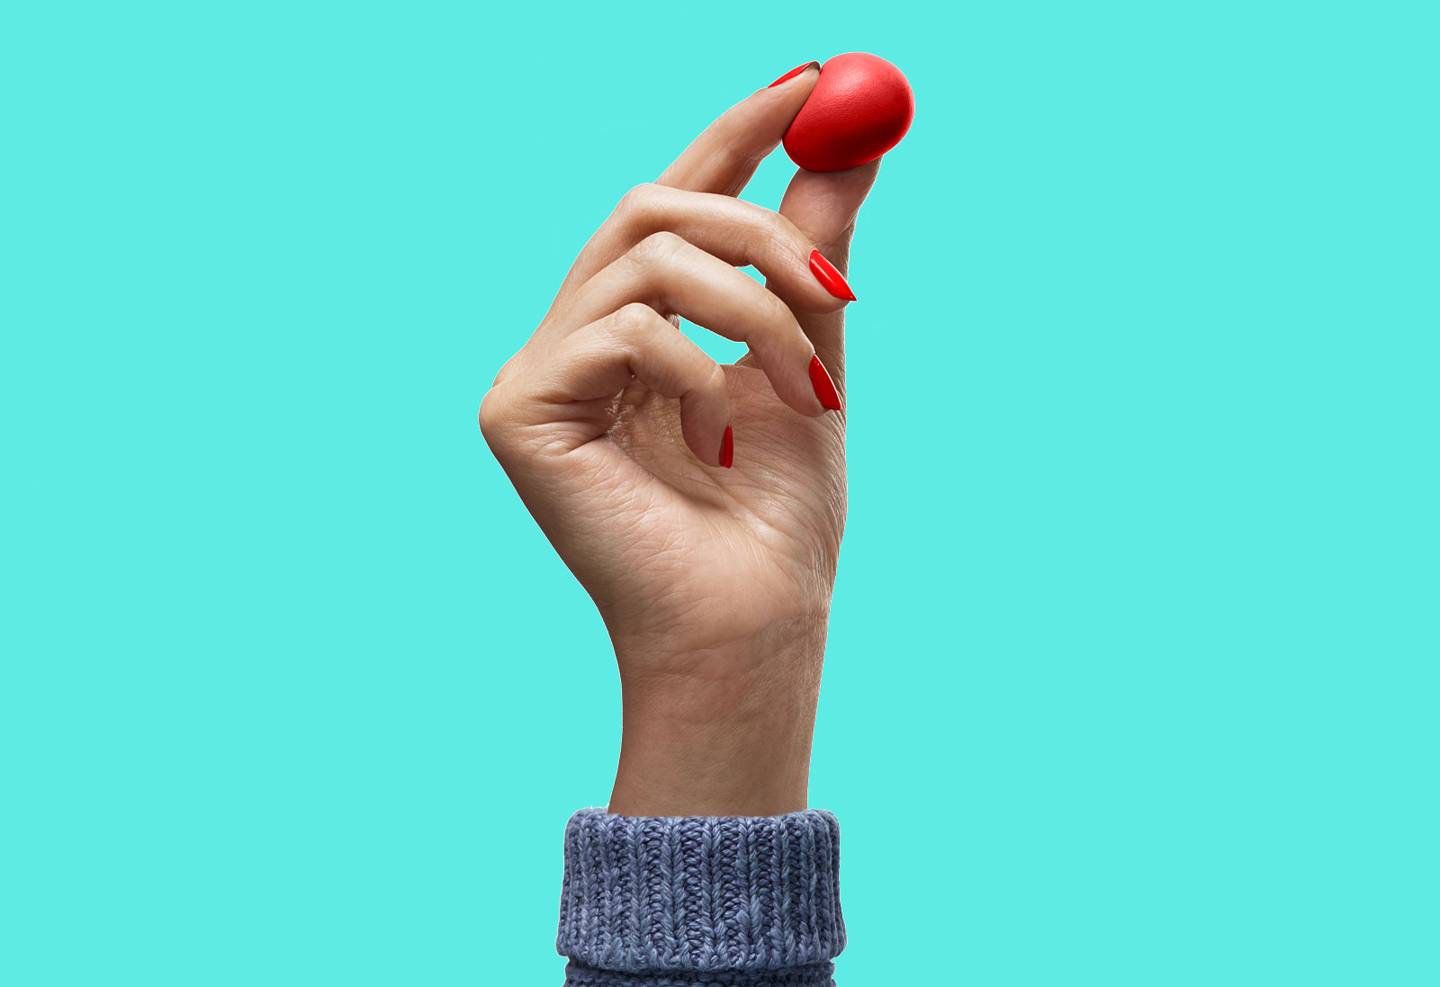 The Rise And Fall Of Sugru The British Blu Tack Rival That